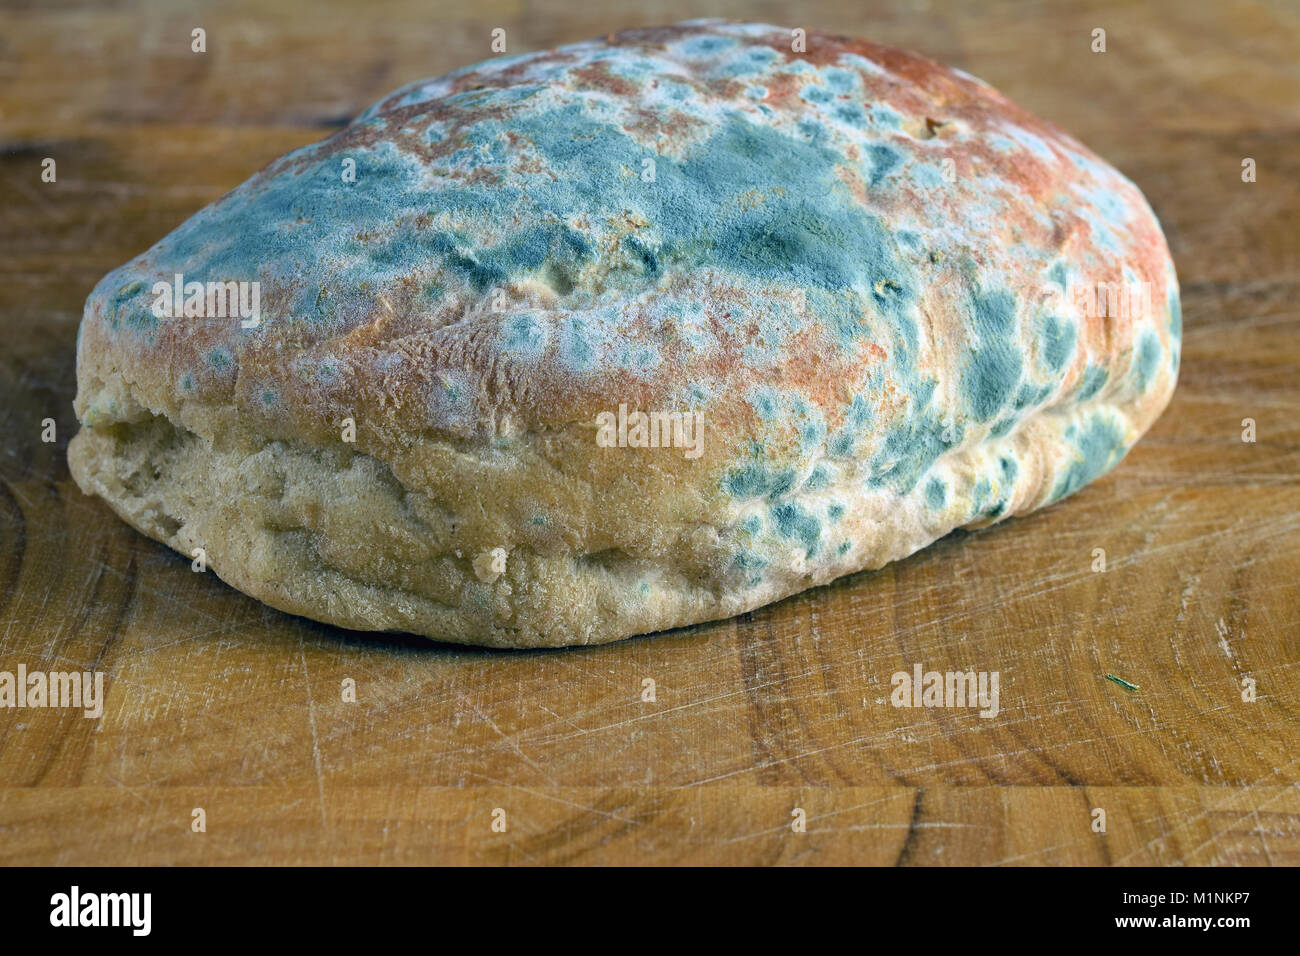 Mold on bread. Best before date has expired a long time ago with this moldy food. Space for text. Stock Photo